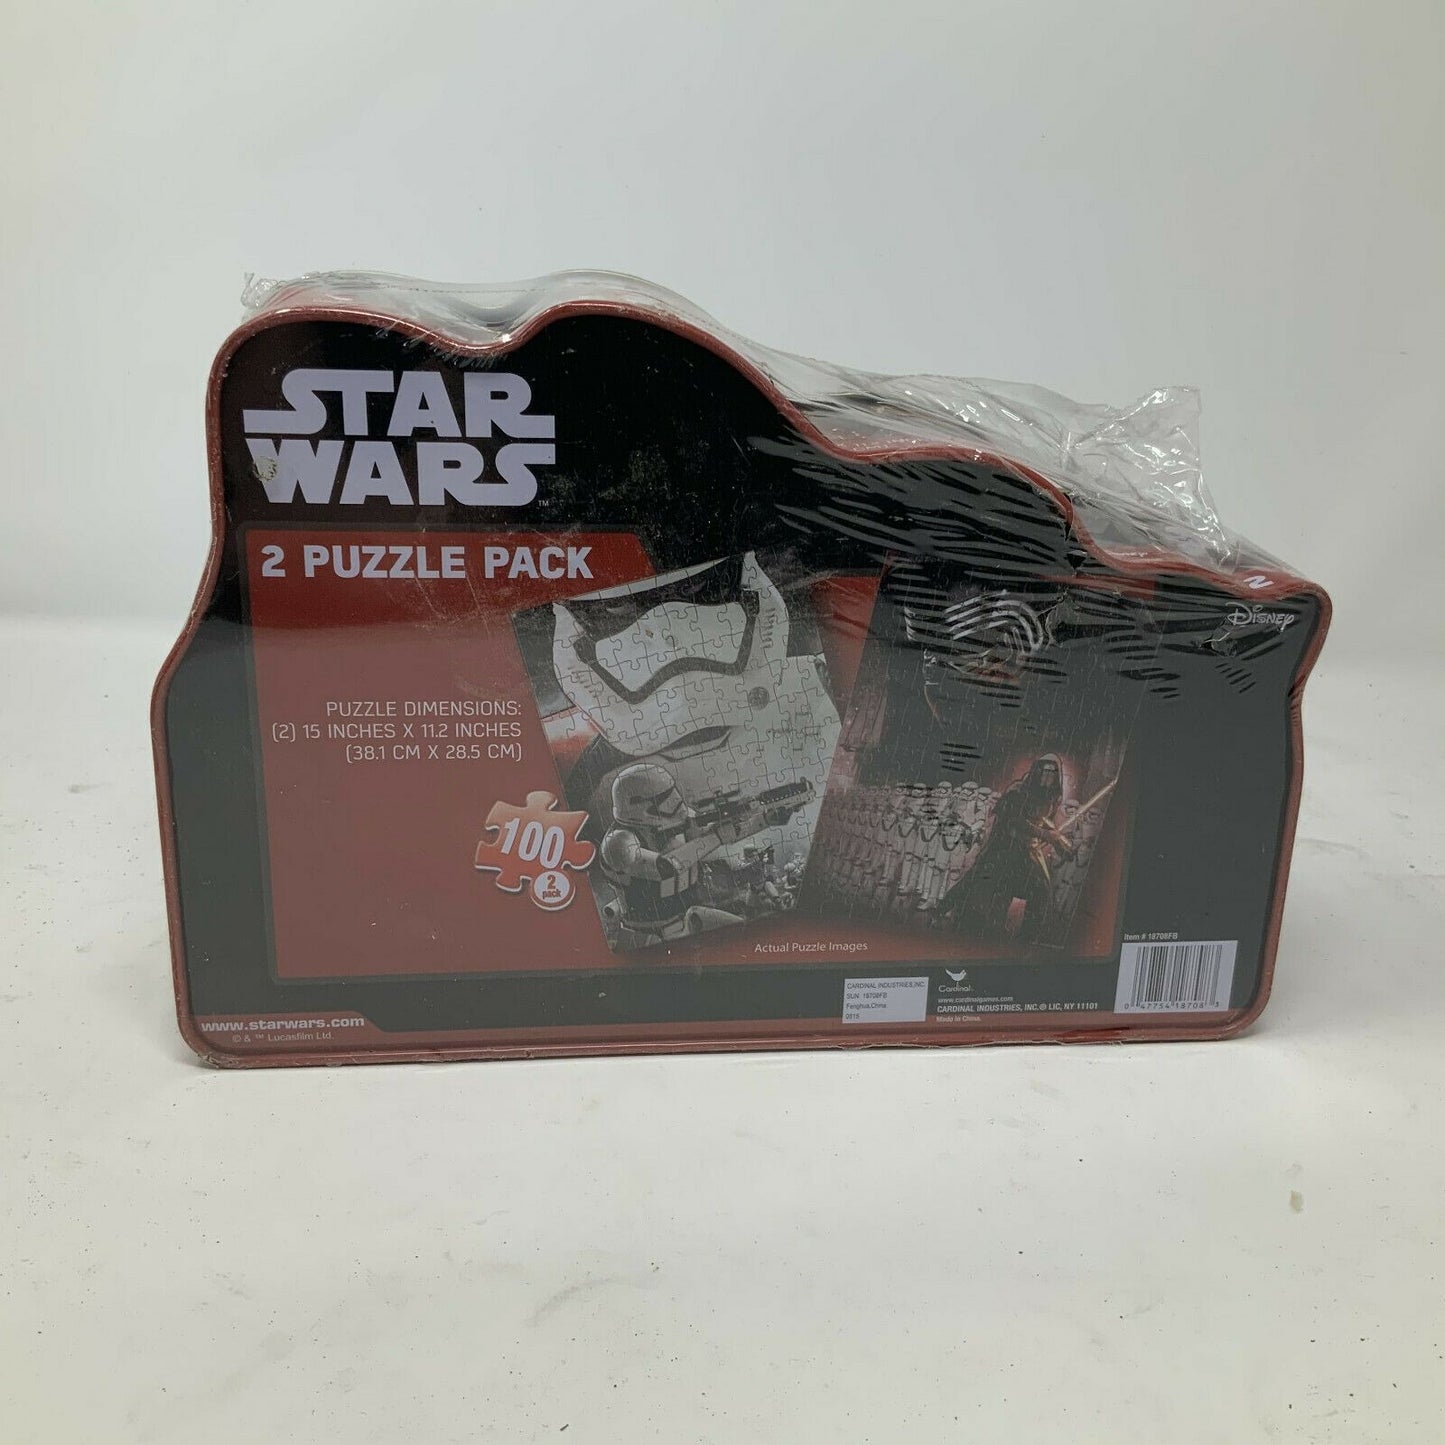 STAR WARS Puzzles in Tin - Storm Troopers - 2 Puzzles (100 pc) NIB